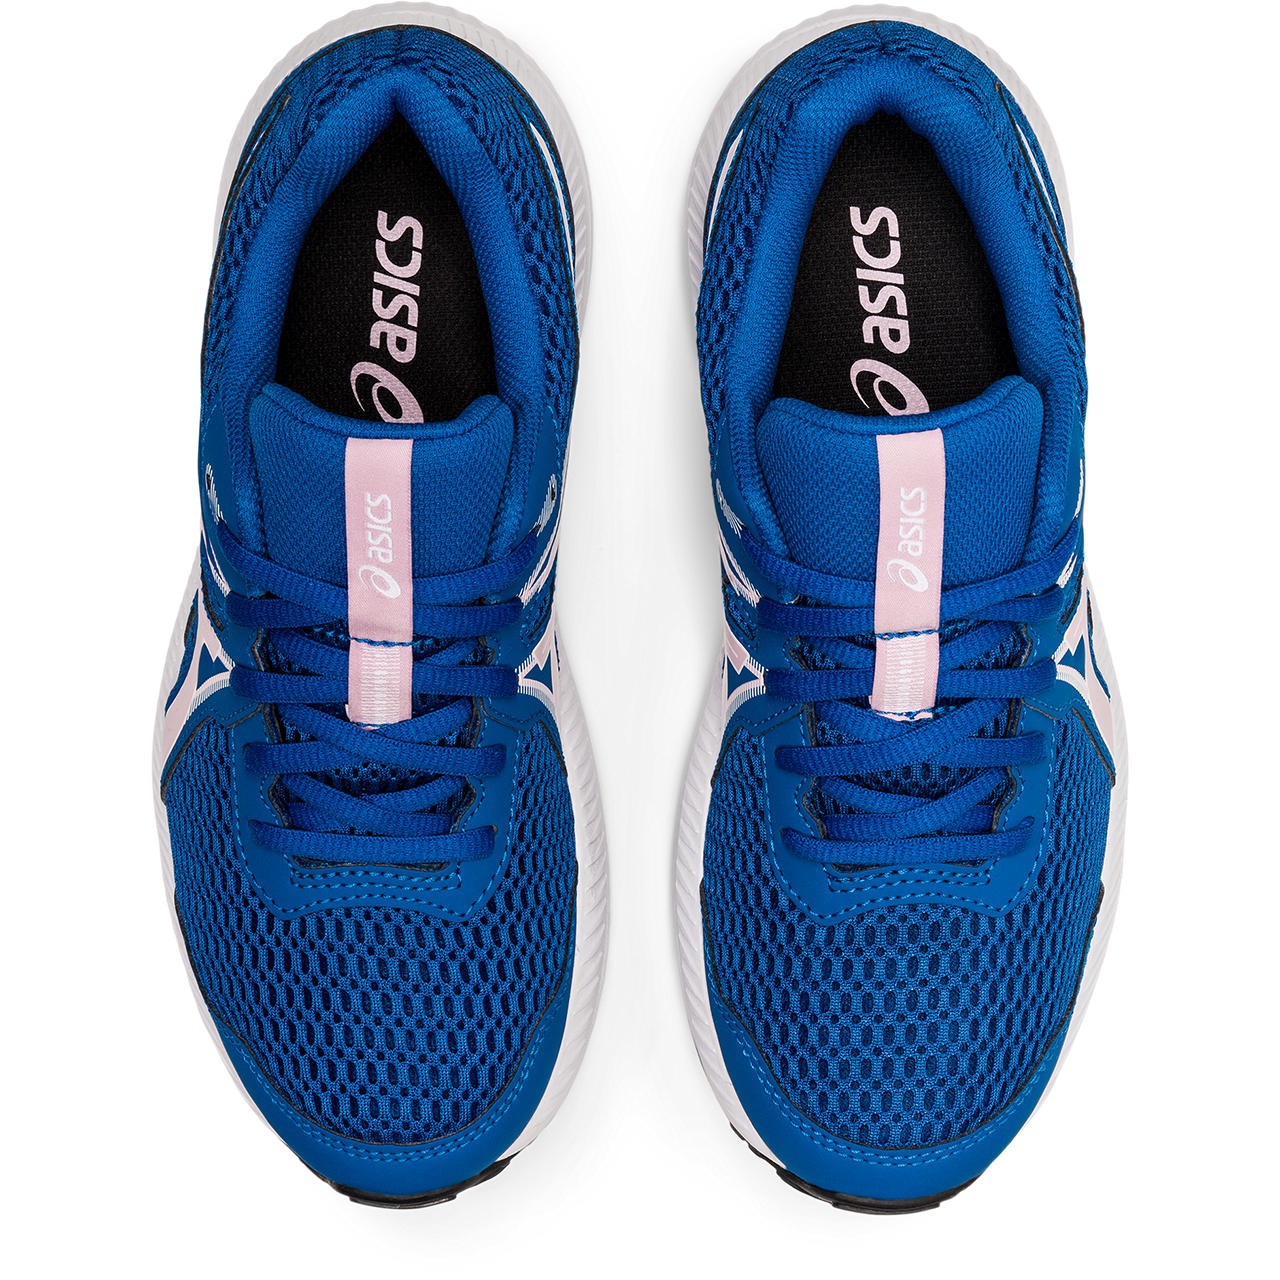 ASICS CONTEND 7 GS image number null